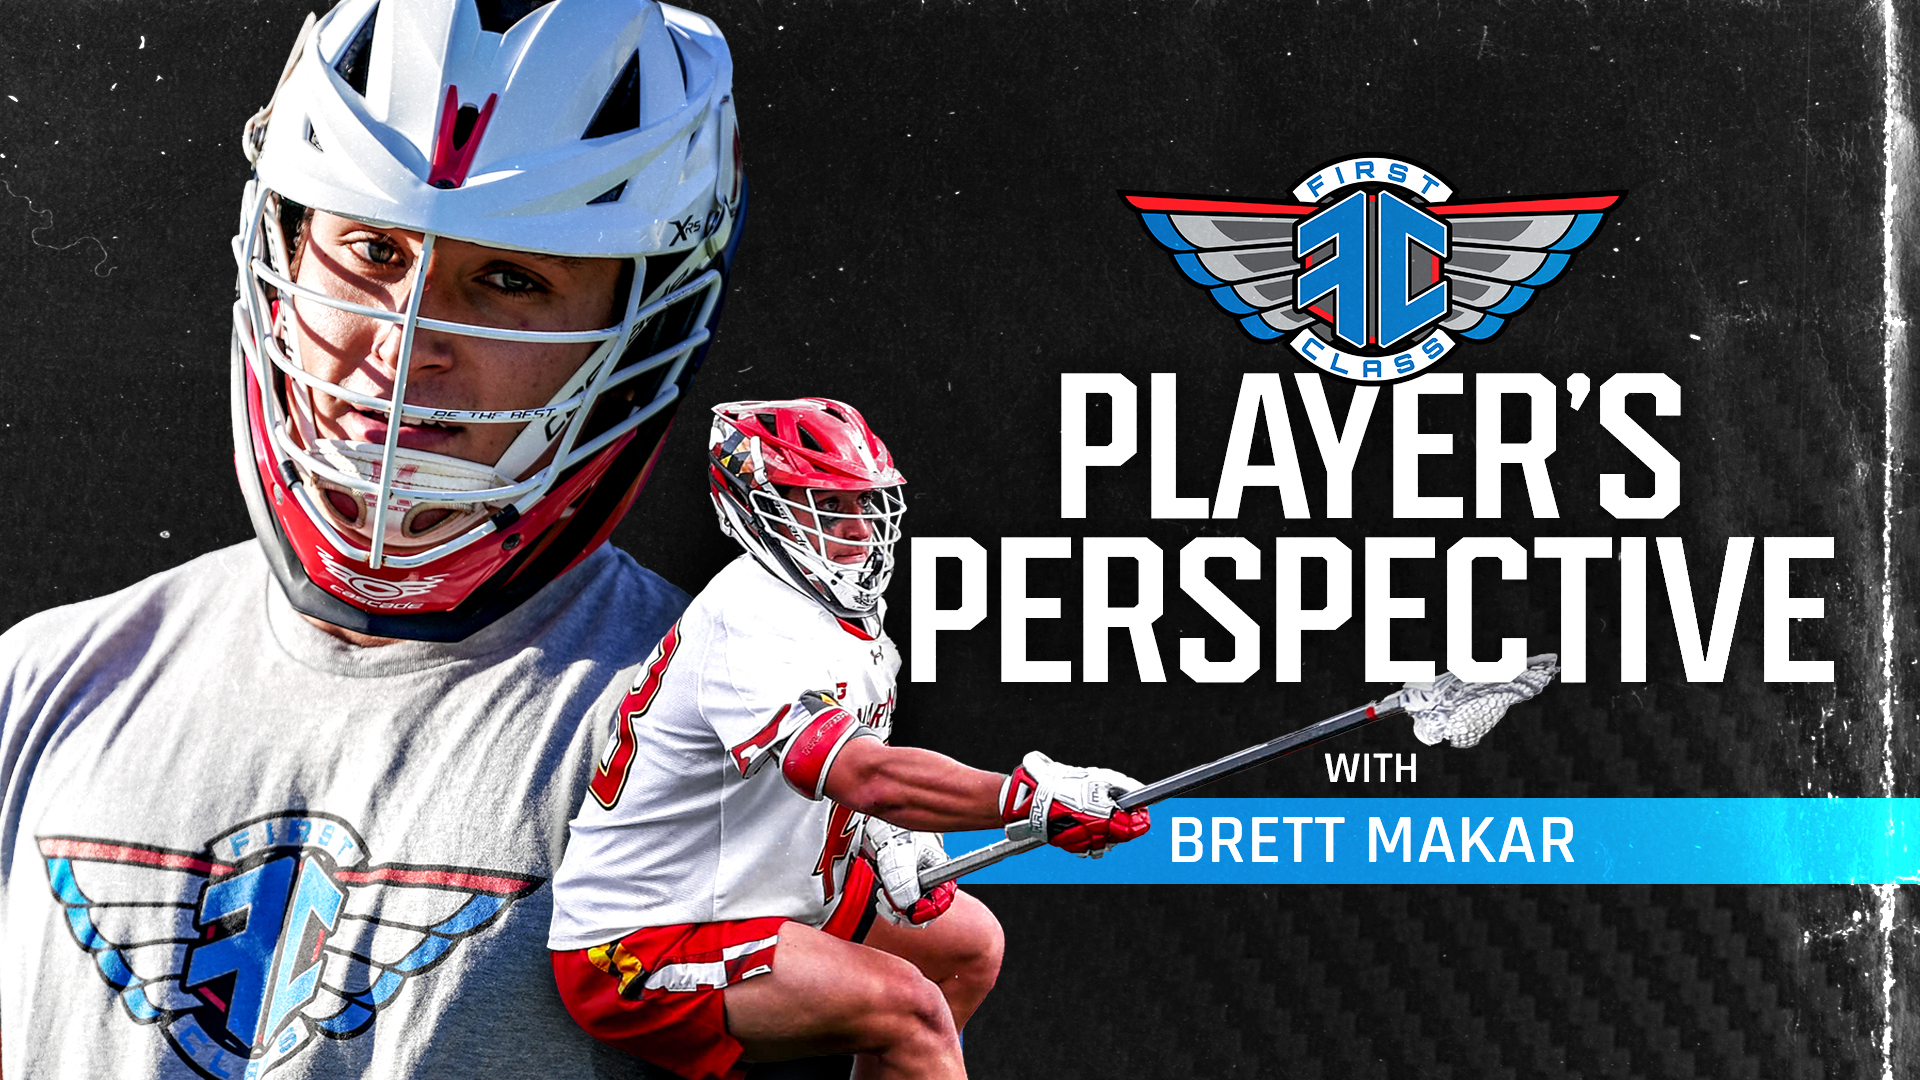 First-Class-Lacrosse-Player-Perspective-Makar